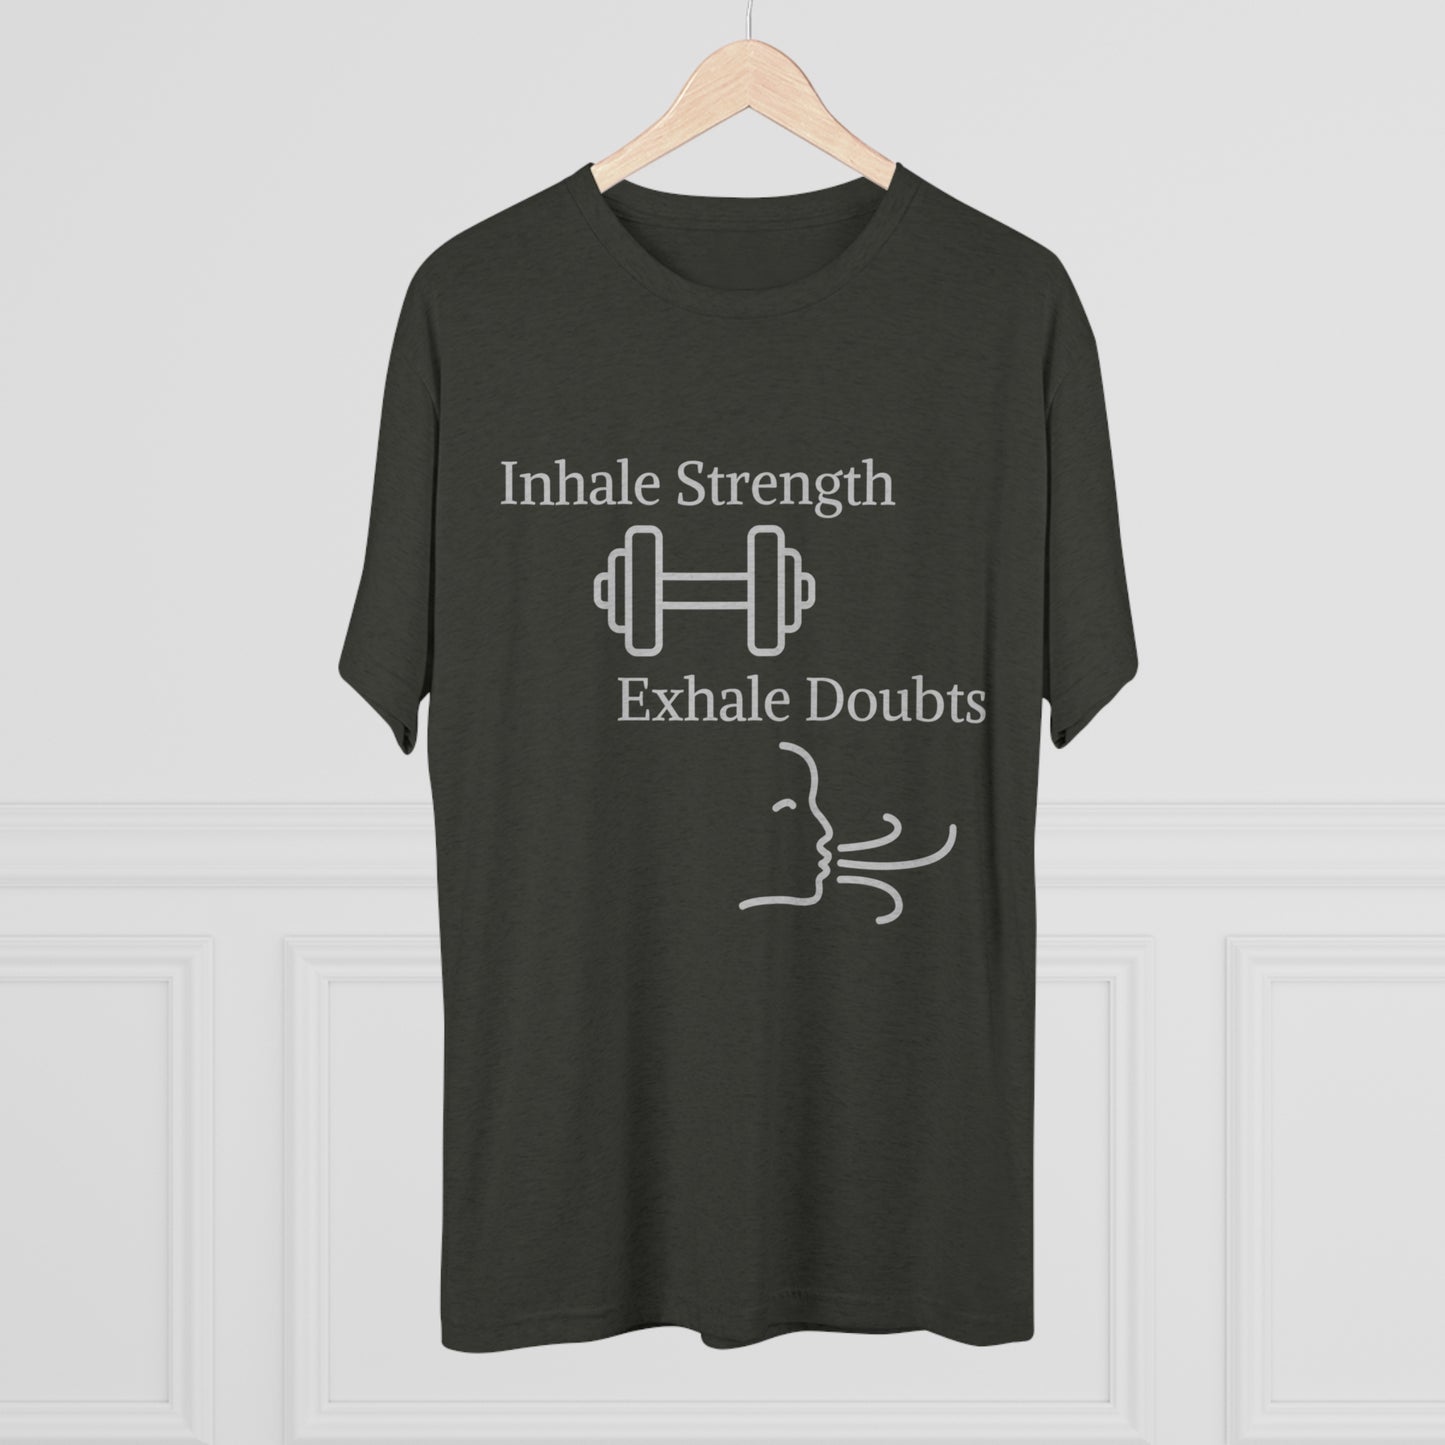 Replace the product in the sentence with the given product name and brand name:

A Printify Inhale Strength Exhale Doubt w Images - Unisex Tri-Blend Crew Tee with white text and graphics that read "inhale strength exhale doubts" above an image of a barbell and a stylized person in a lotus position meditating.